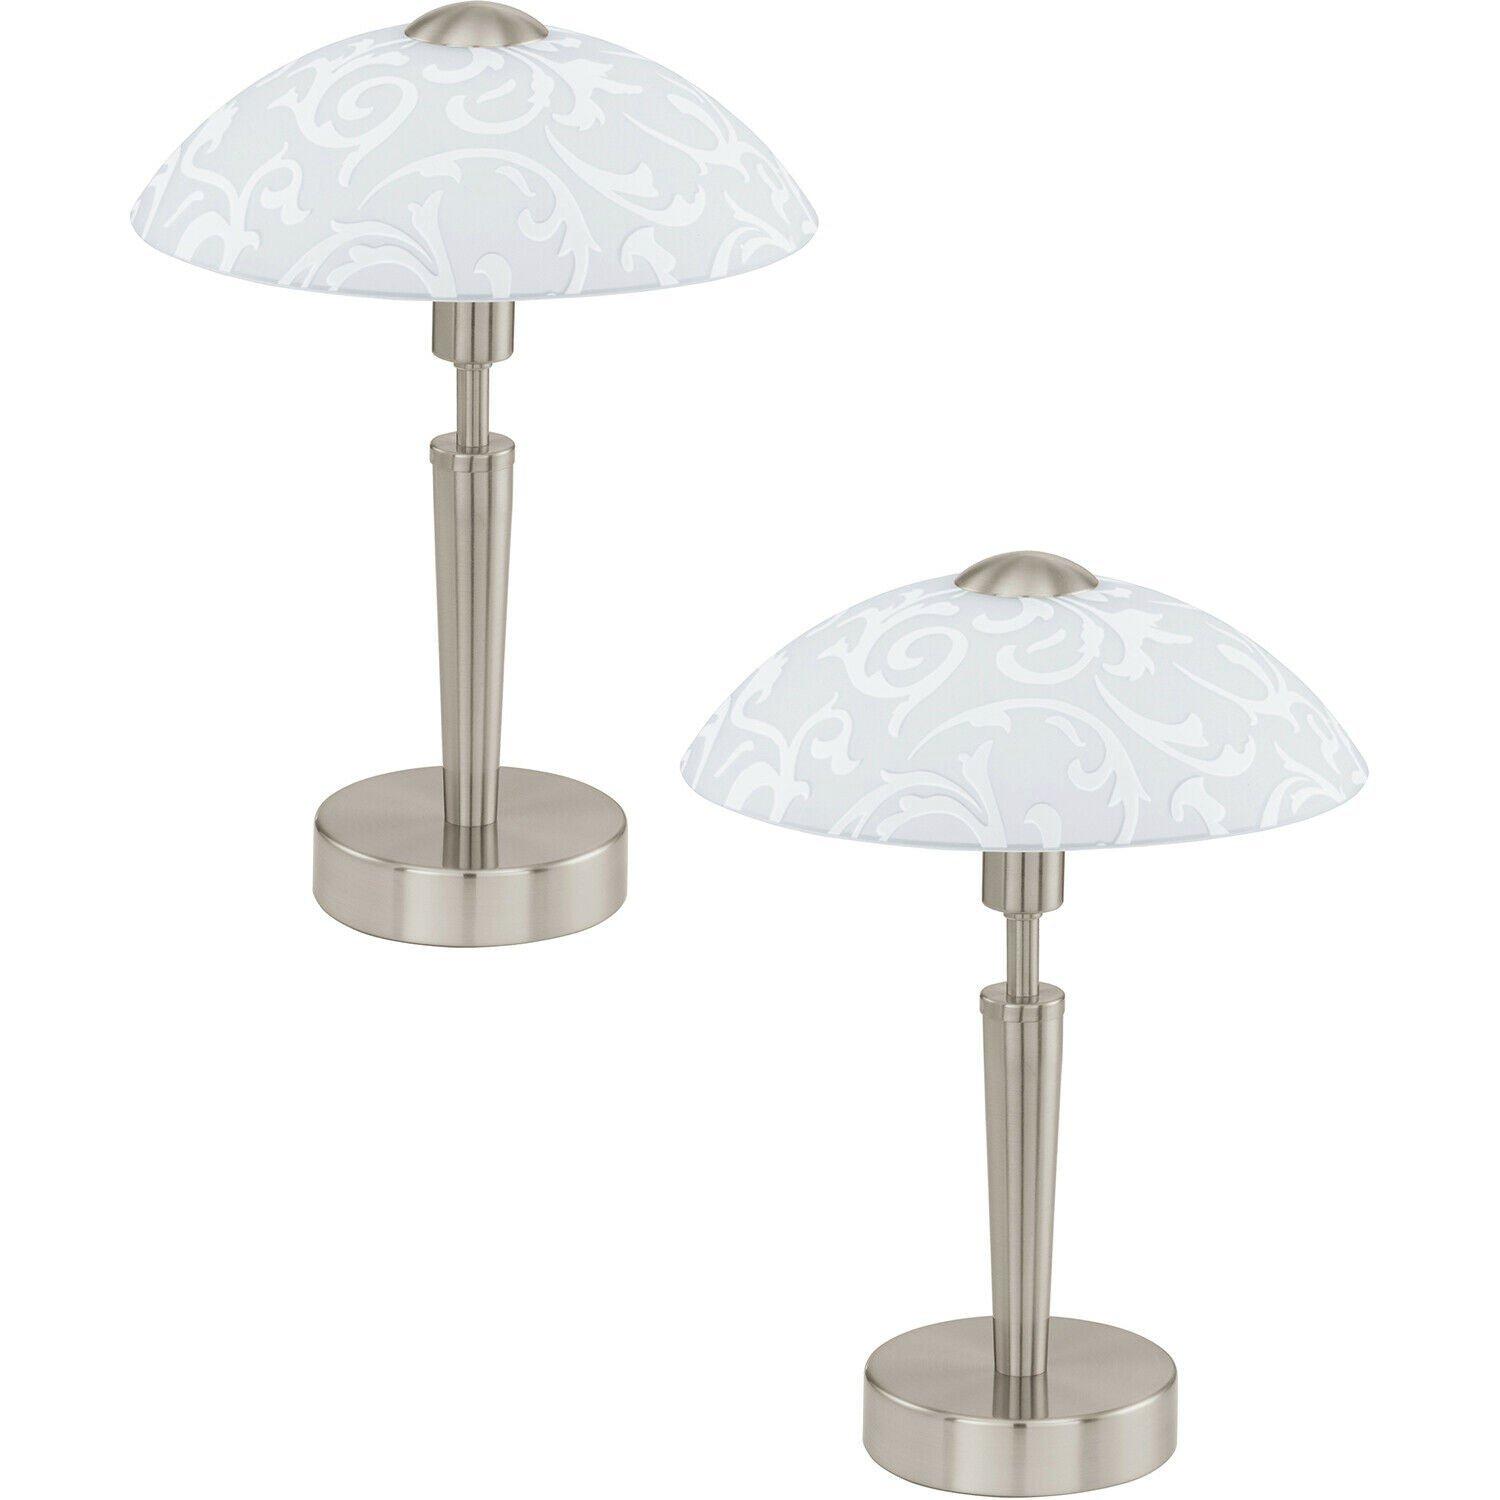 2 PACK Table Lamp Colour Satin Nickel Shade White With Decor Satin Glass E14 60W